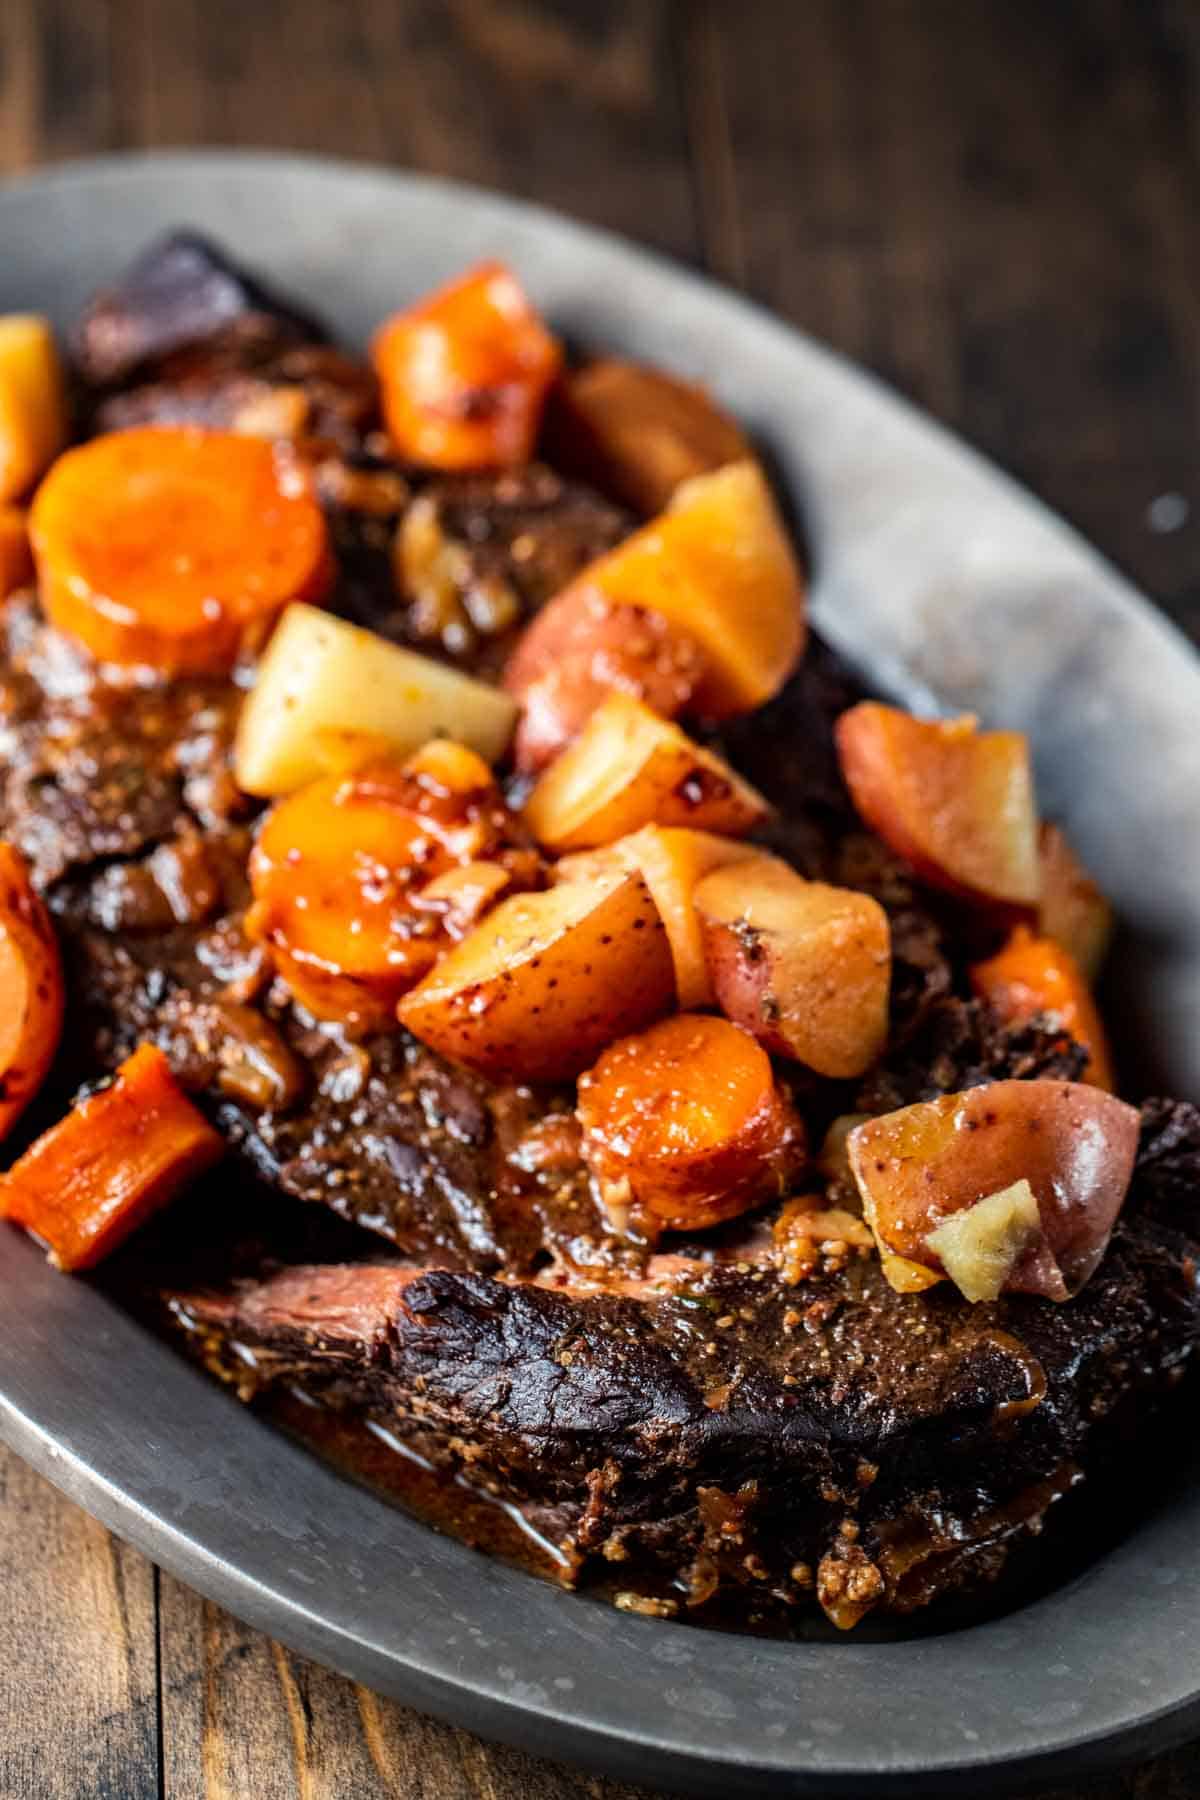 cooked beef with carrots and potatoes on a plate